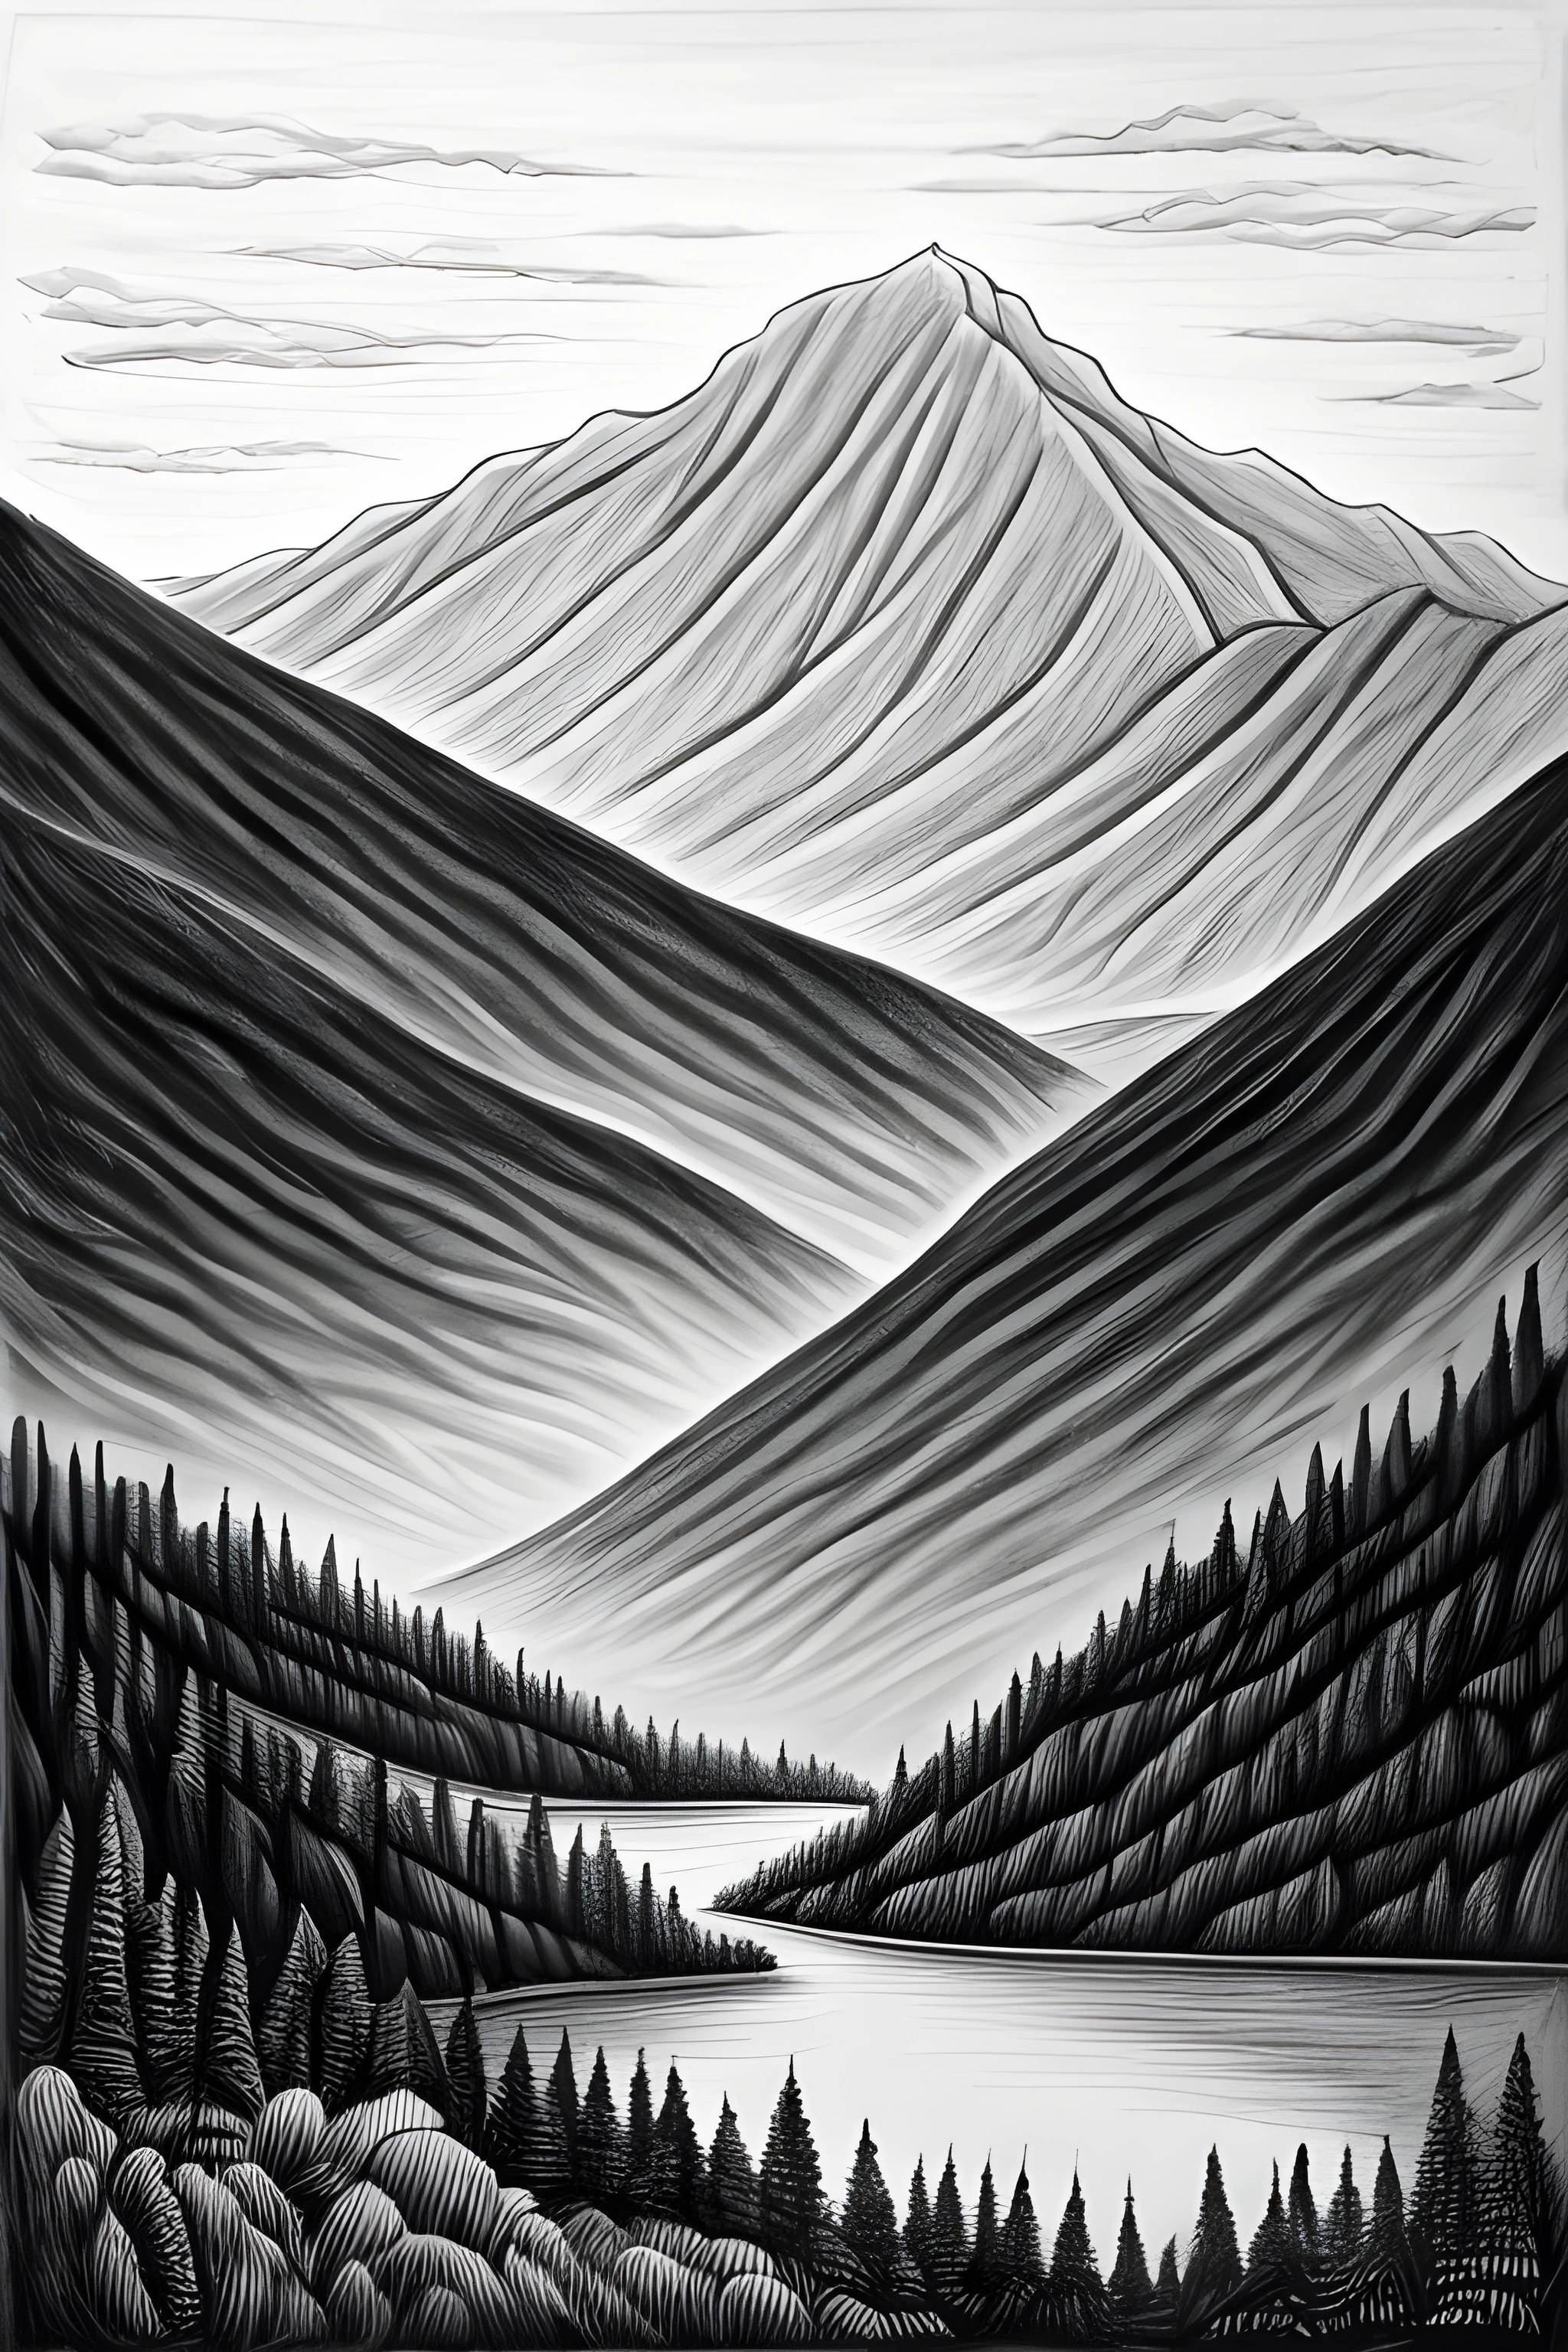 a black and white drawing of a mountain scene with a lake